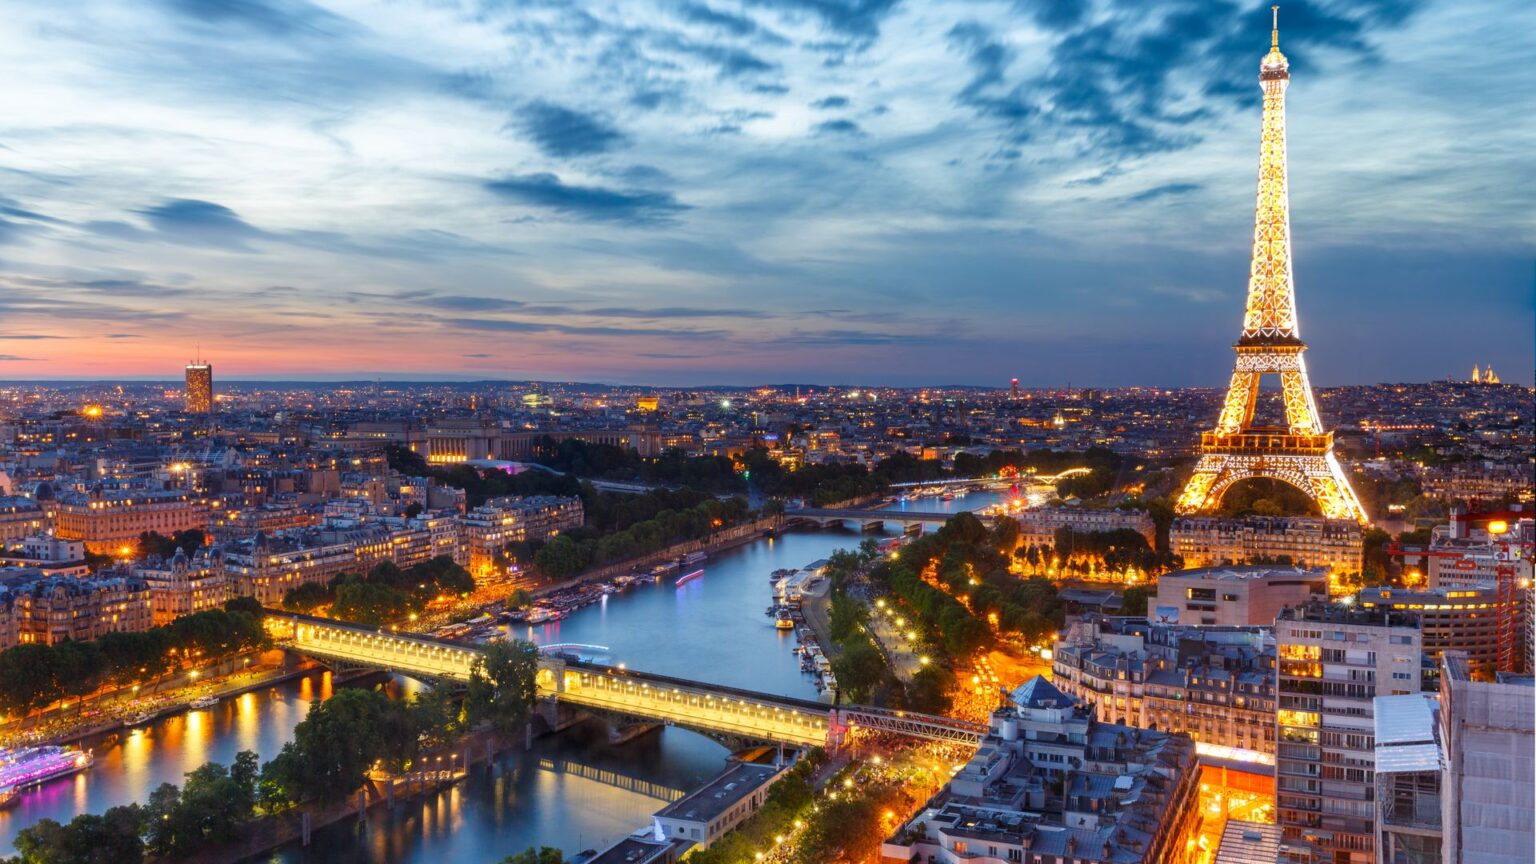 5 Best Things to Do At Night in Paris